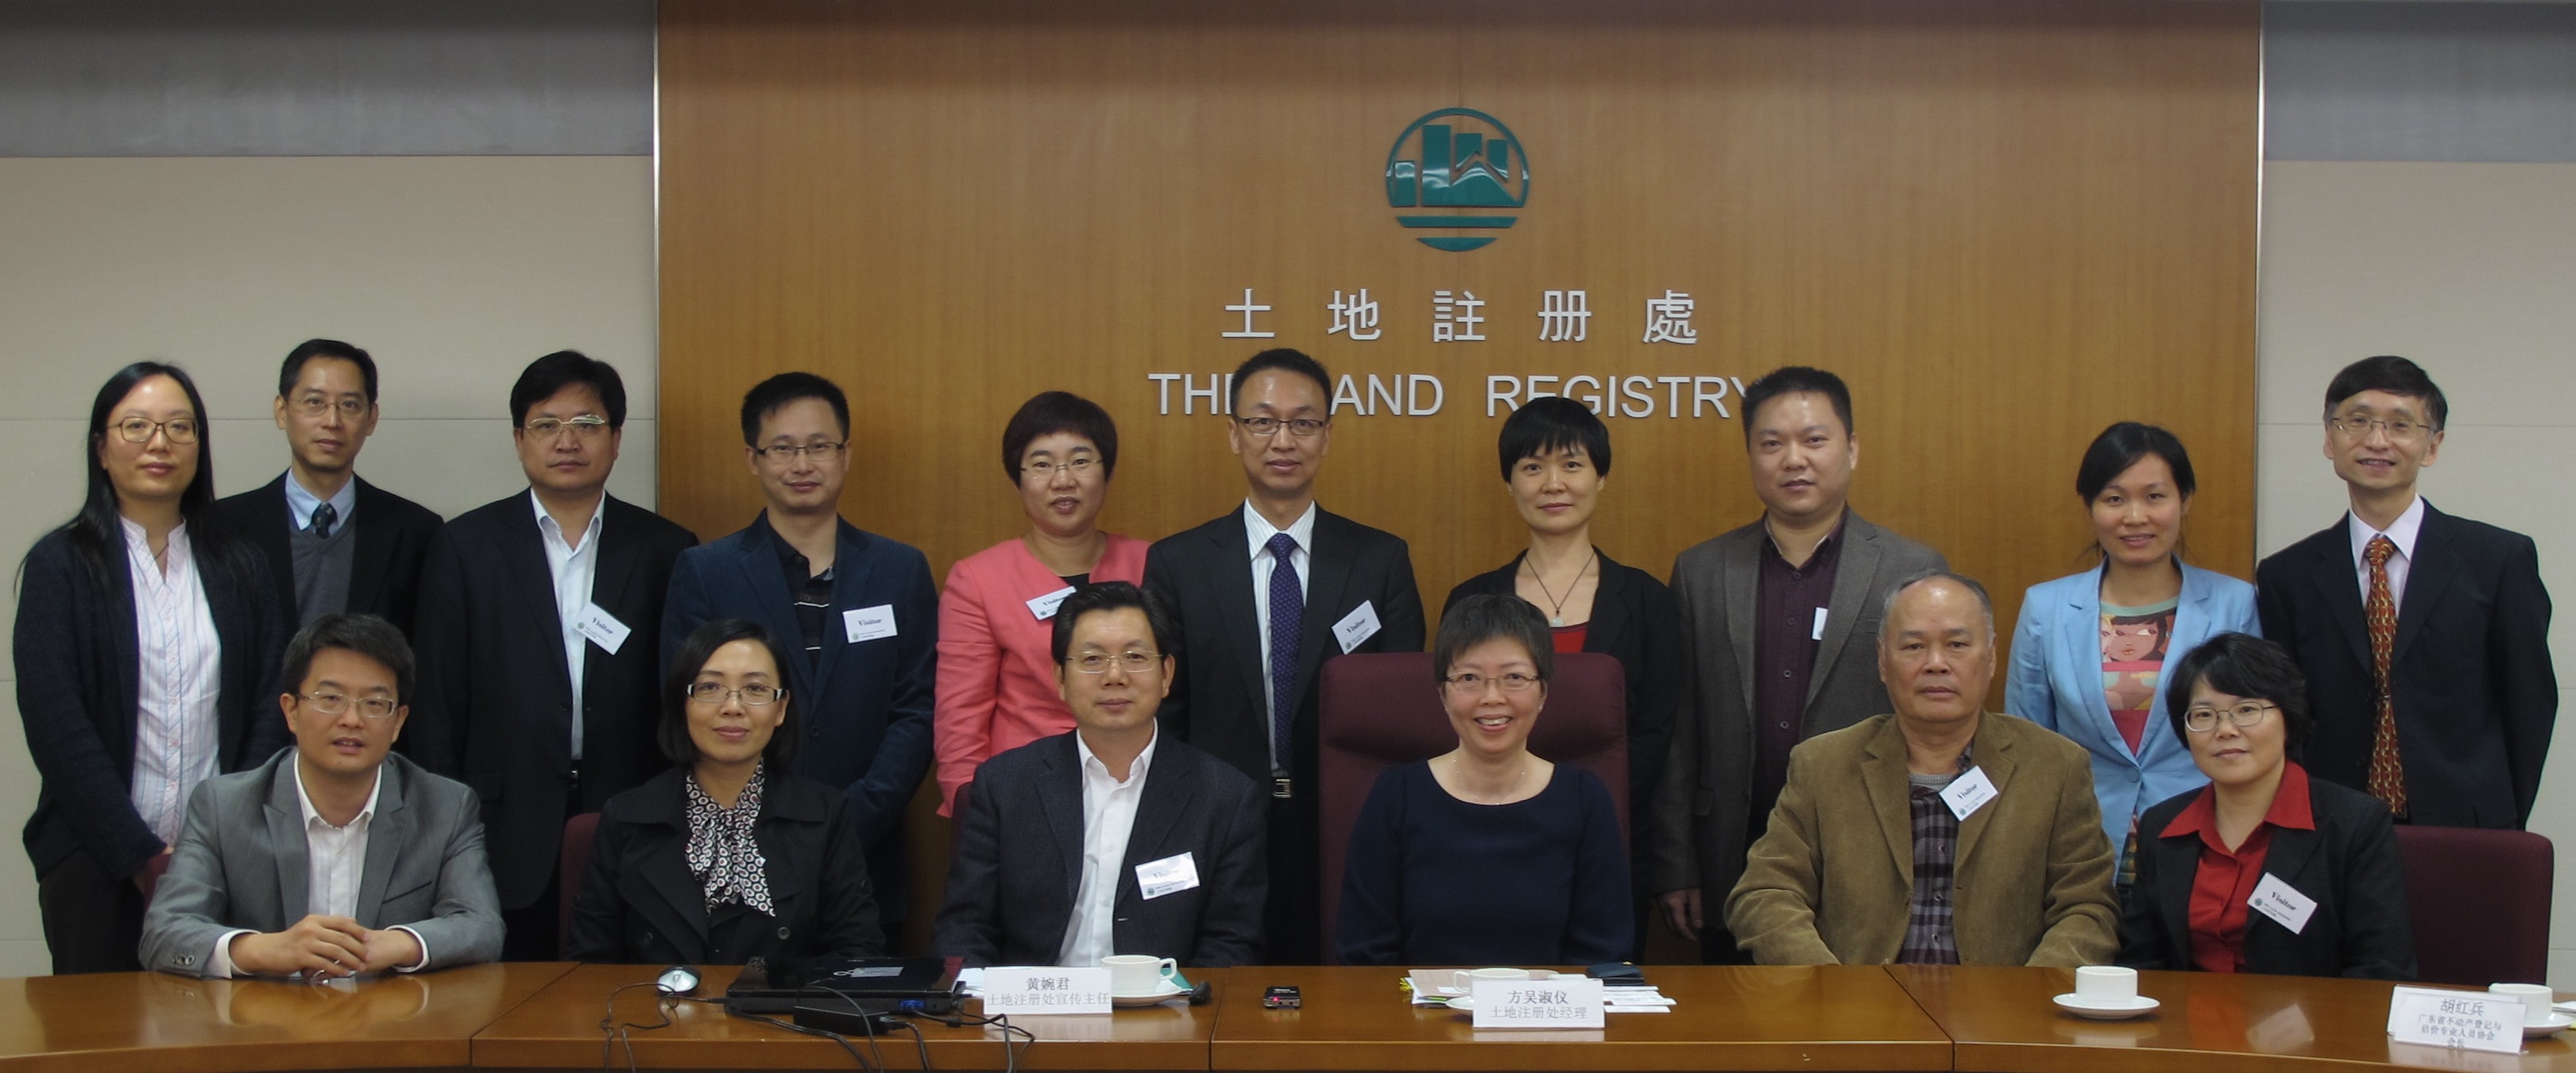 GuangDong Association Of Land Valuers And Agents and the representatives of the Land Registry